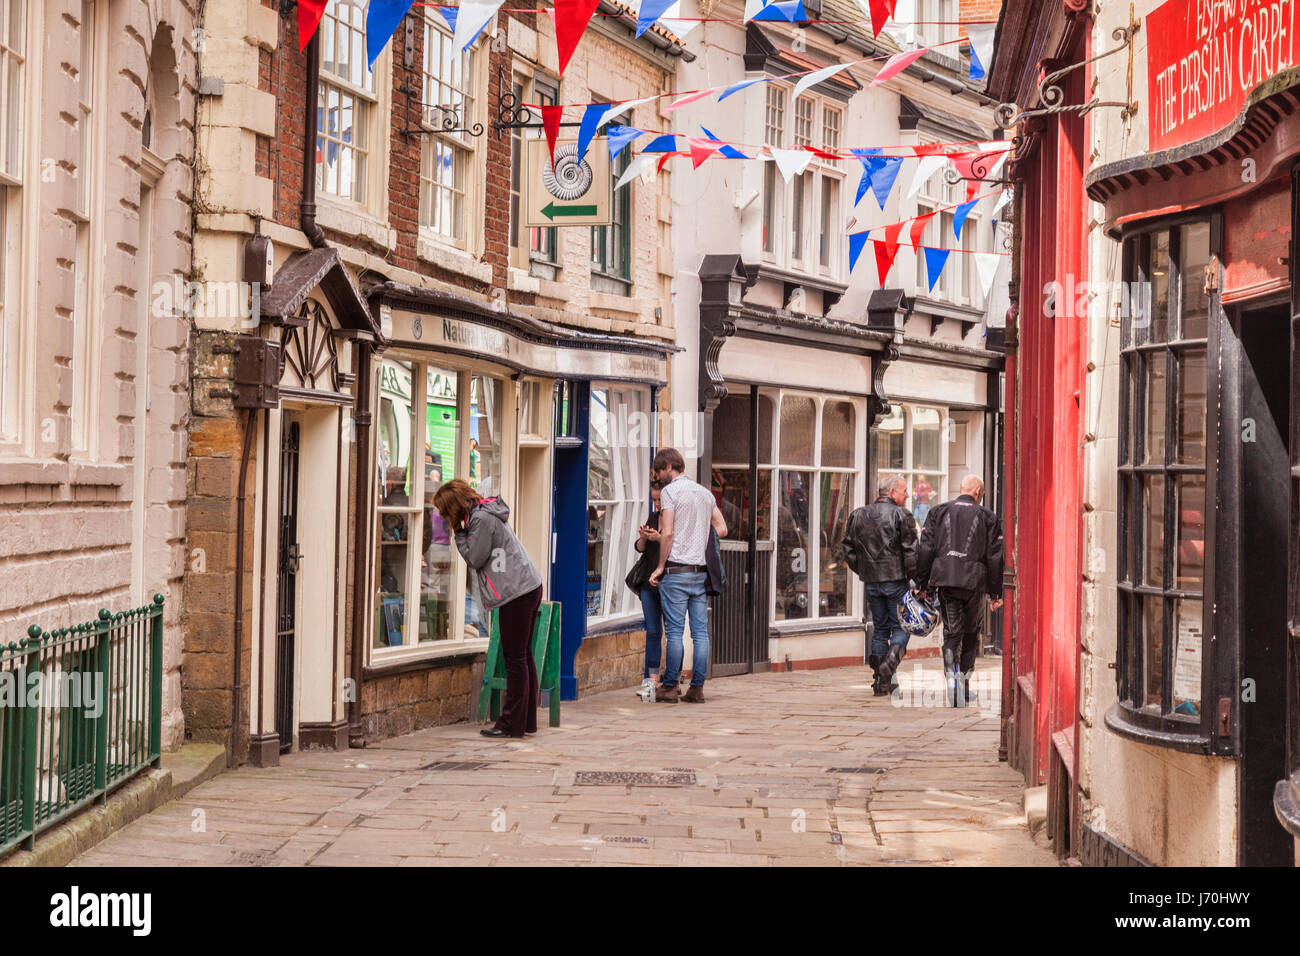 Shoppers and visitors in Grape Lane, Whitby, North Yorkshire, England. Stock Photo